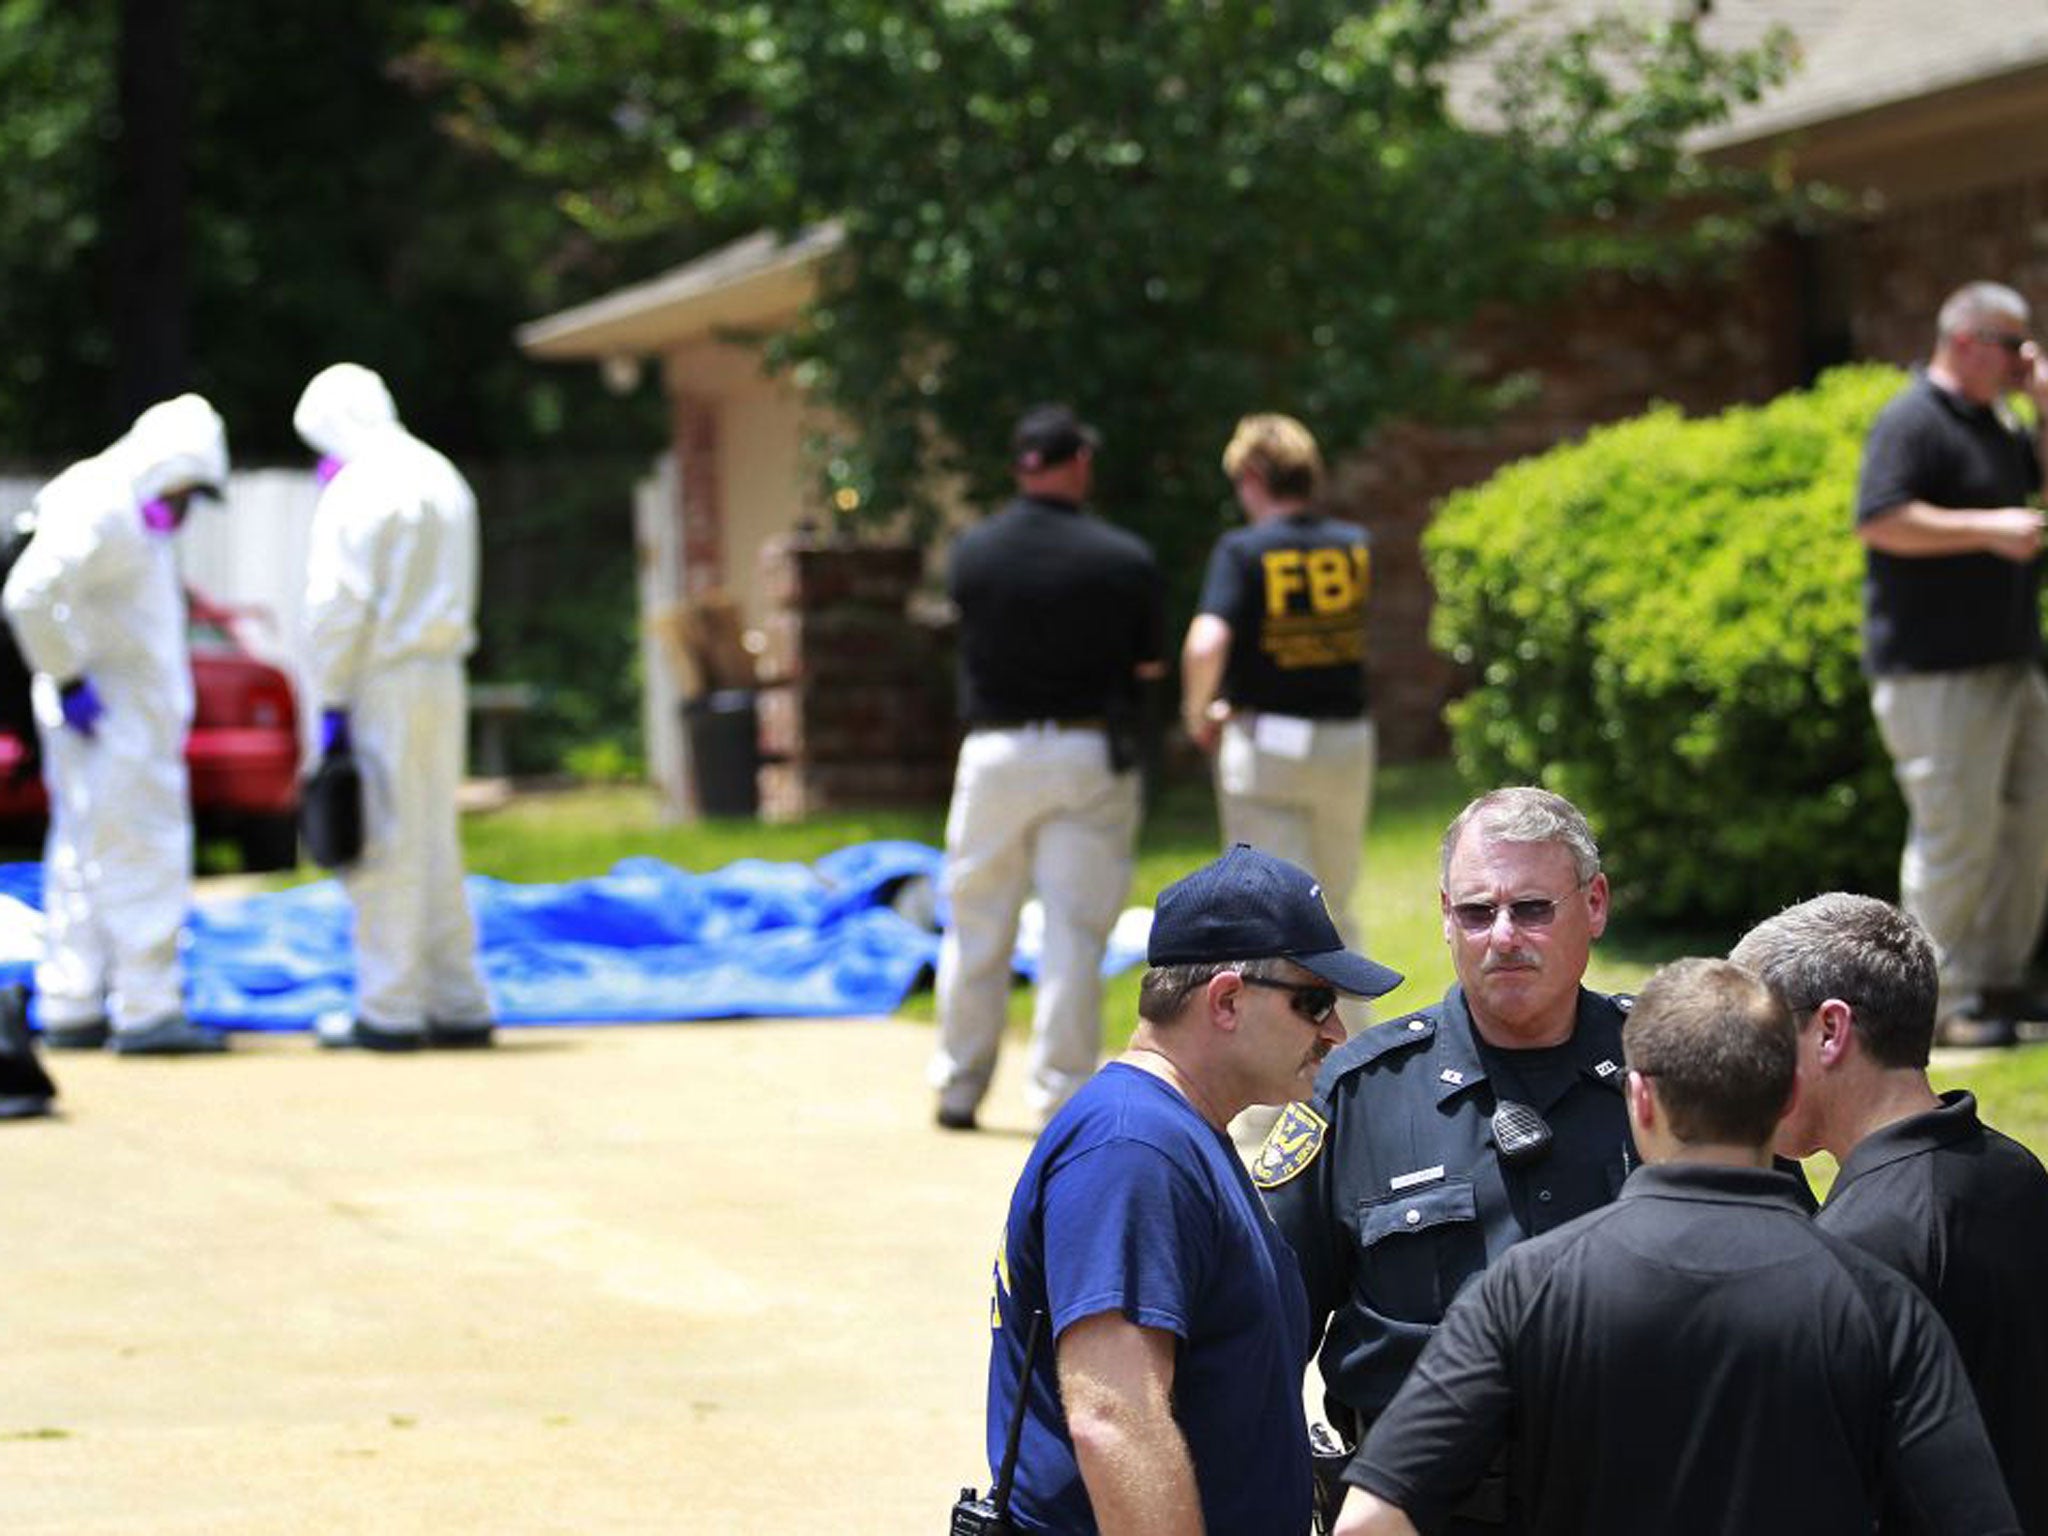 Authorities search a residence in New Boston, Texas in connection with a federal investigation surrounding ricin-laced letters mailed to President Barack Obama and New York Mayor Michael Bloomberg